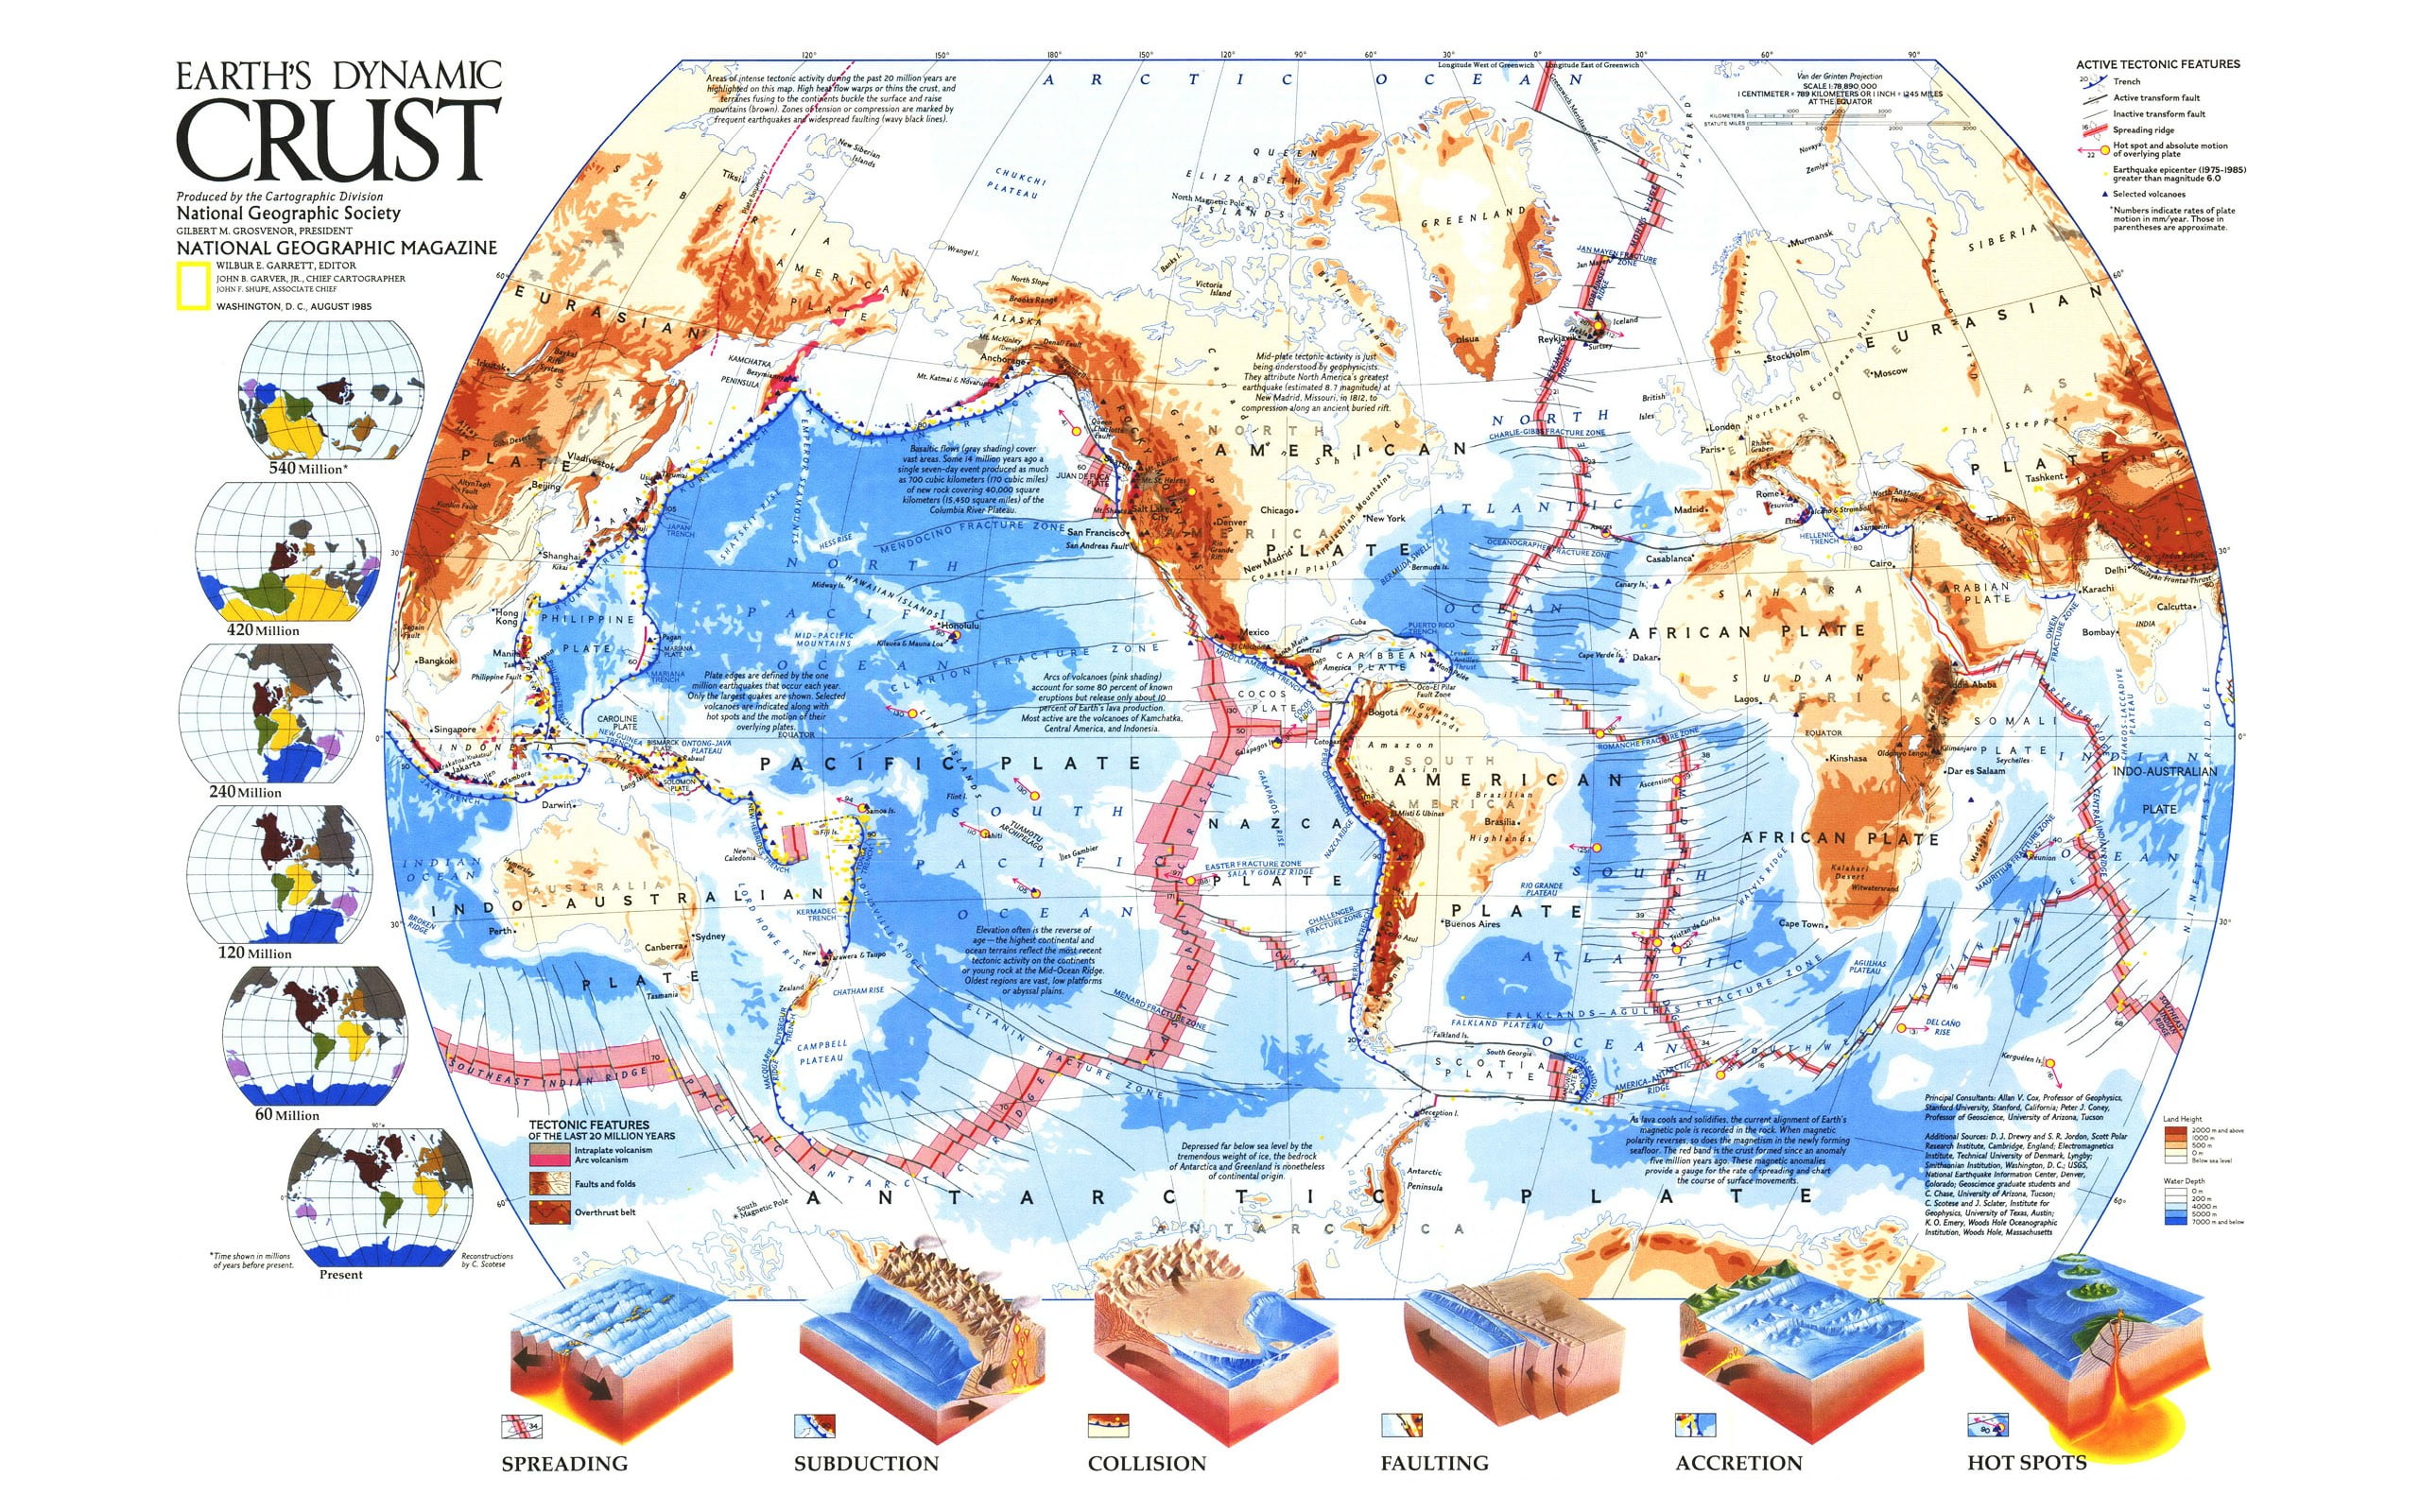 earth's dynamic crust illustration, Earth, diagrams, map, National Geographic